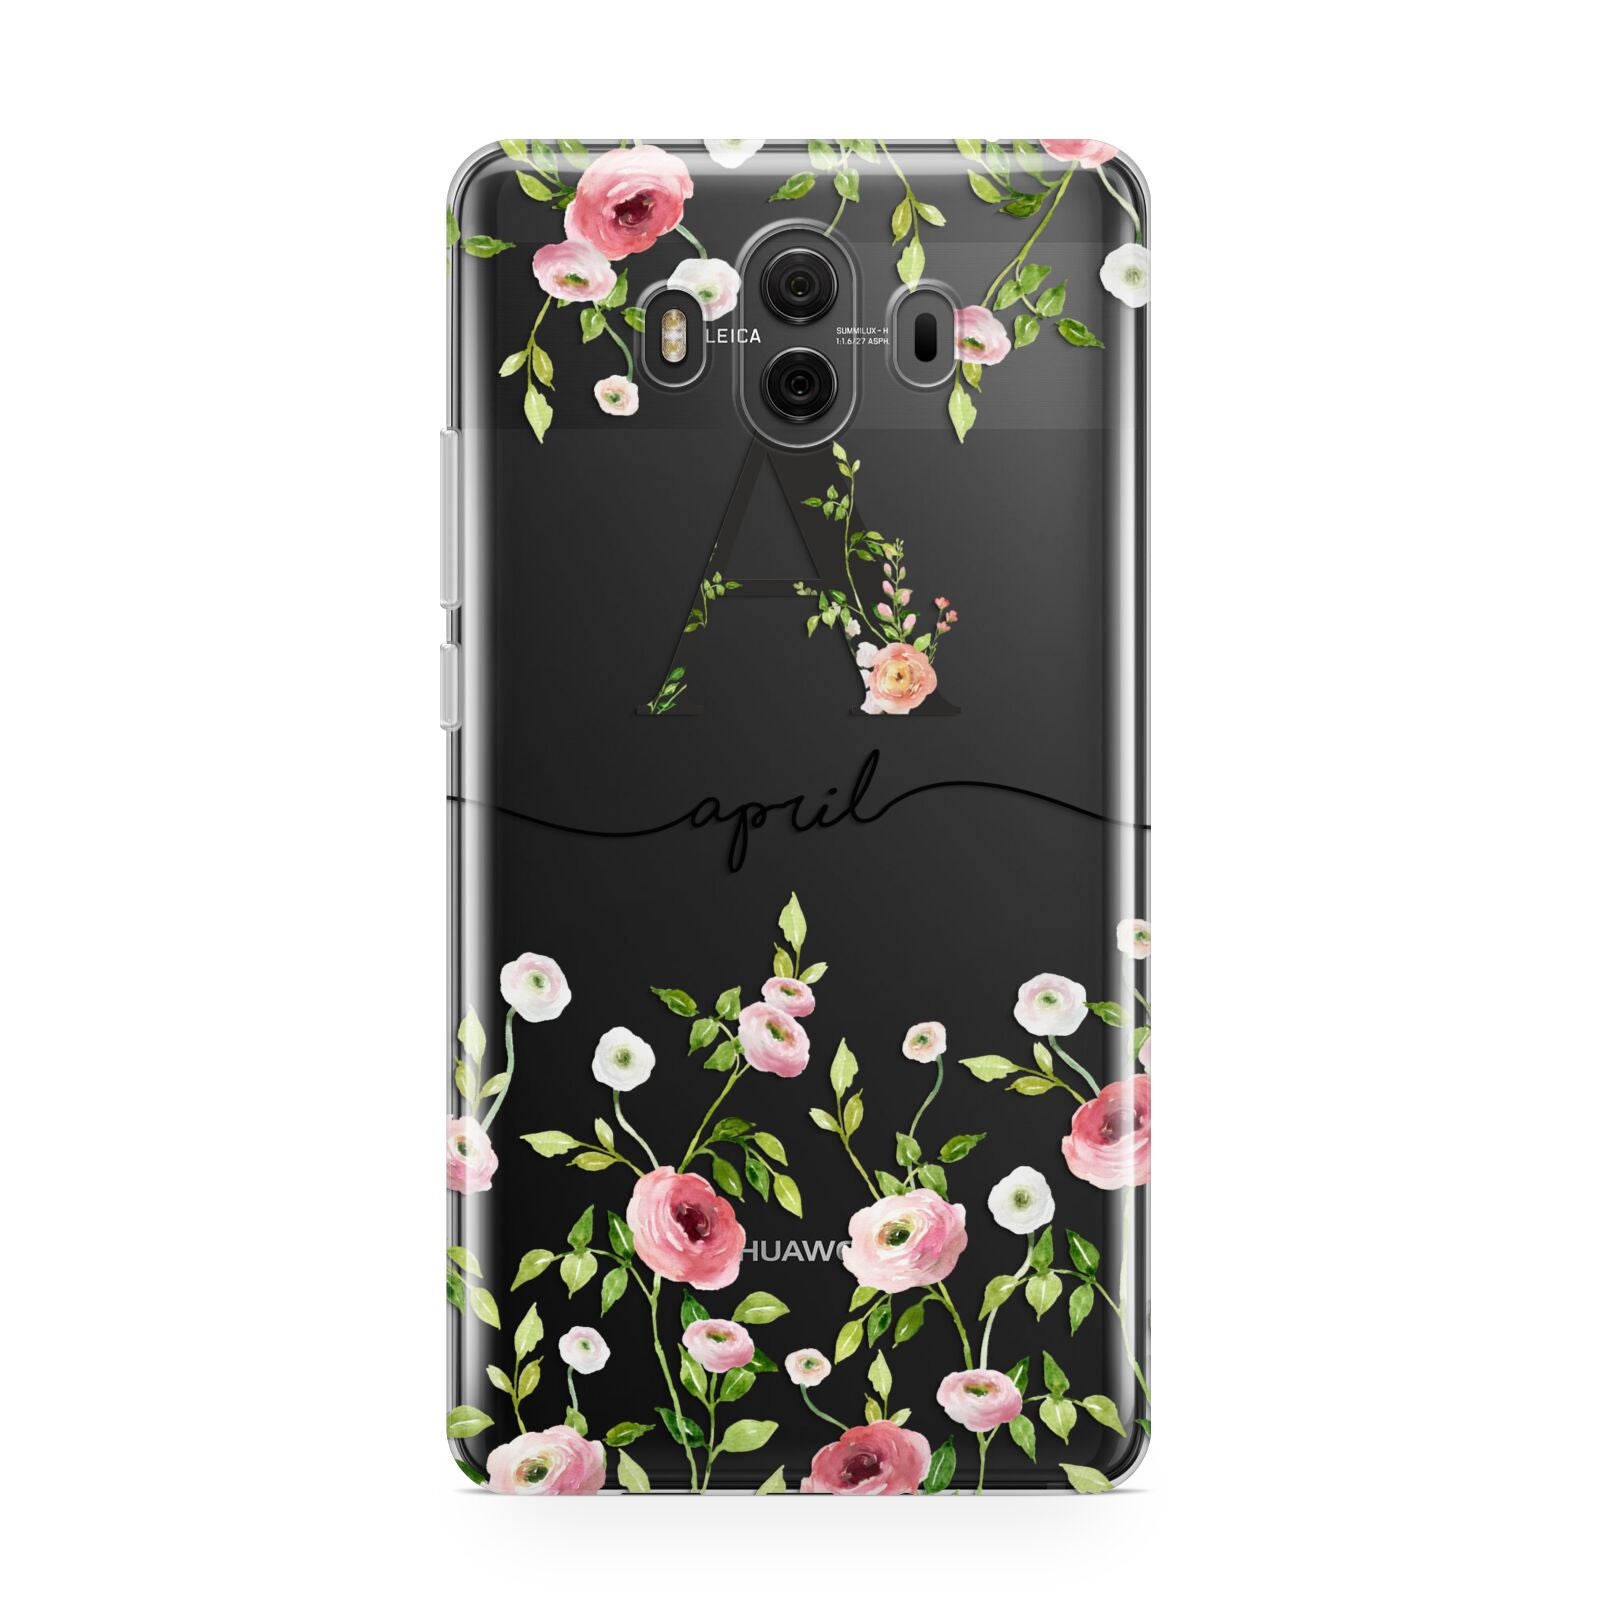 Personalised Floral Initial Huawei Mate 10 Protective Phone Case